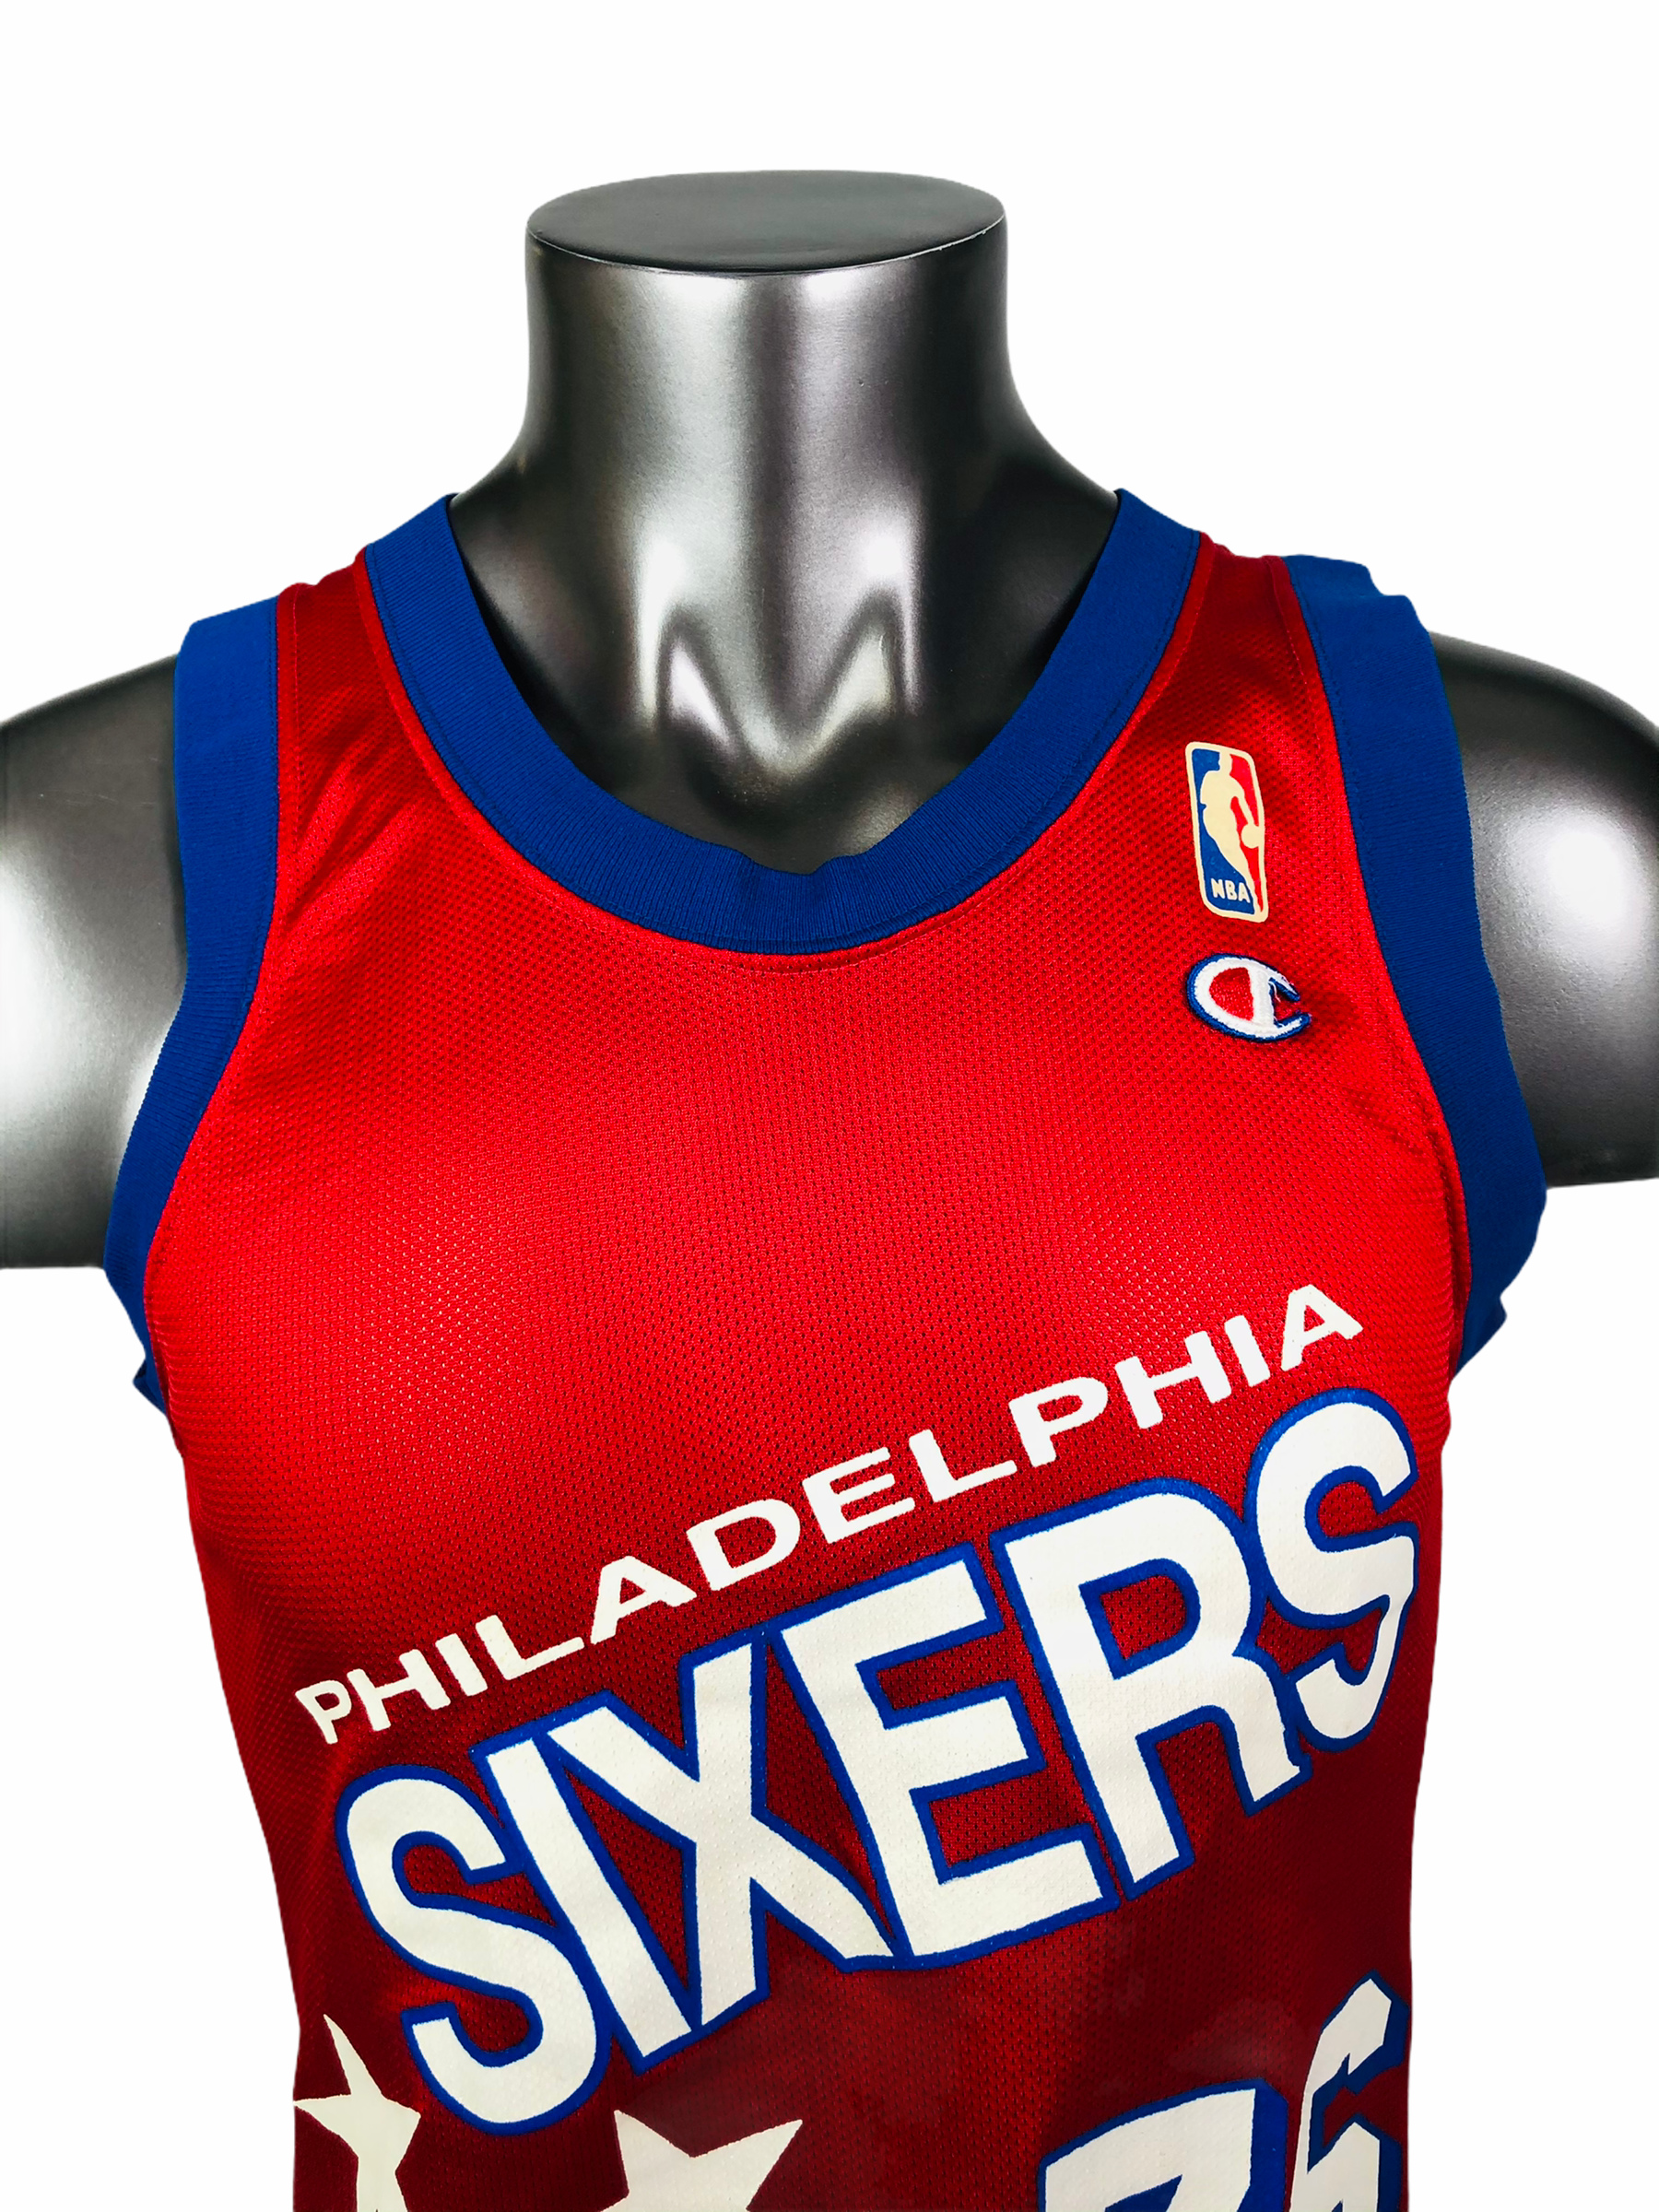 classic sixers jersey